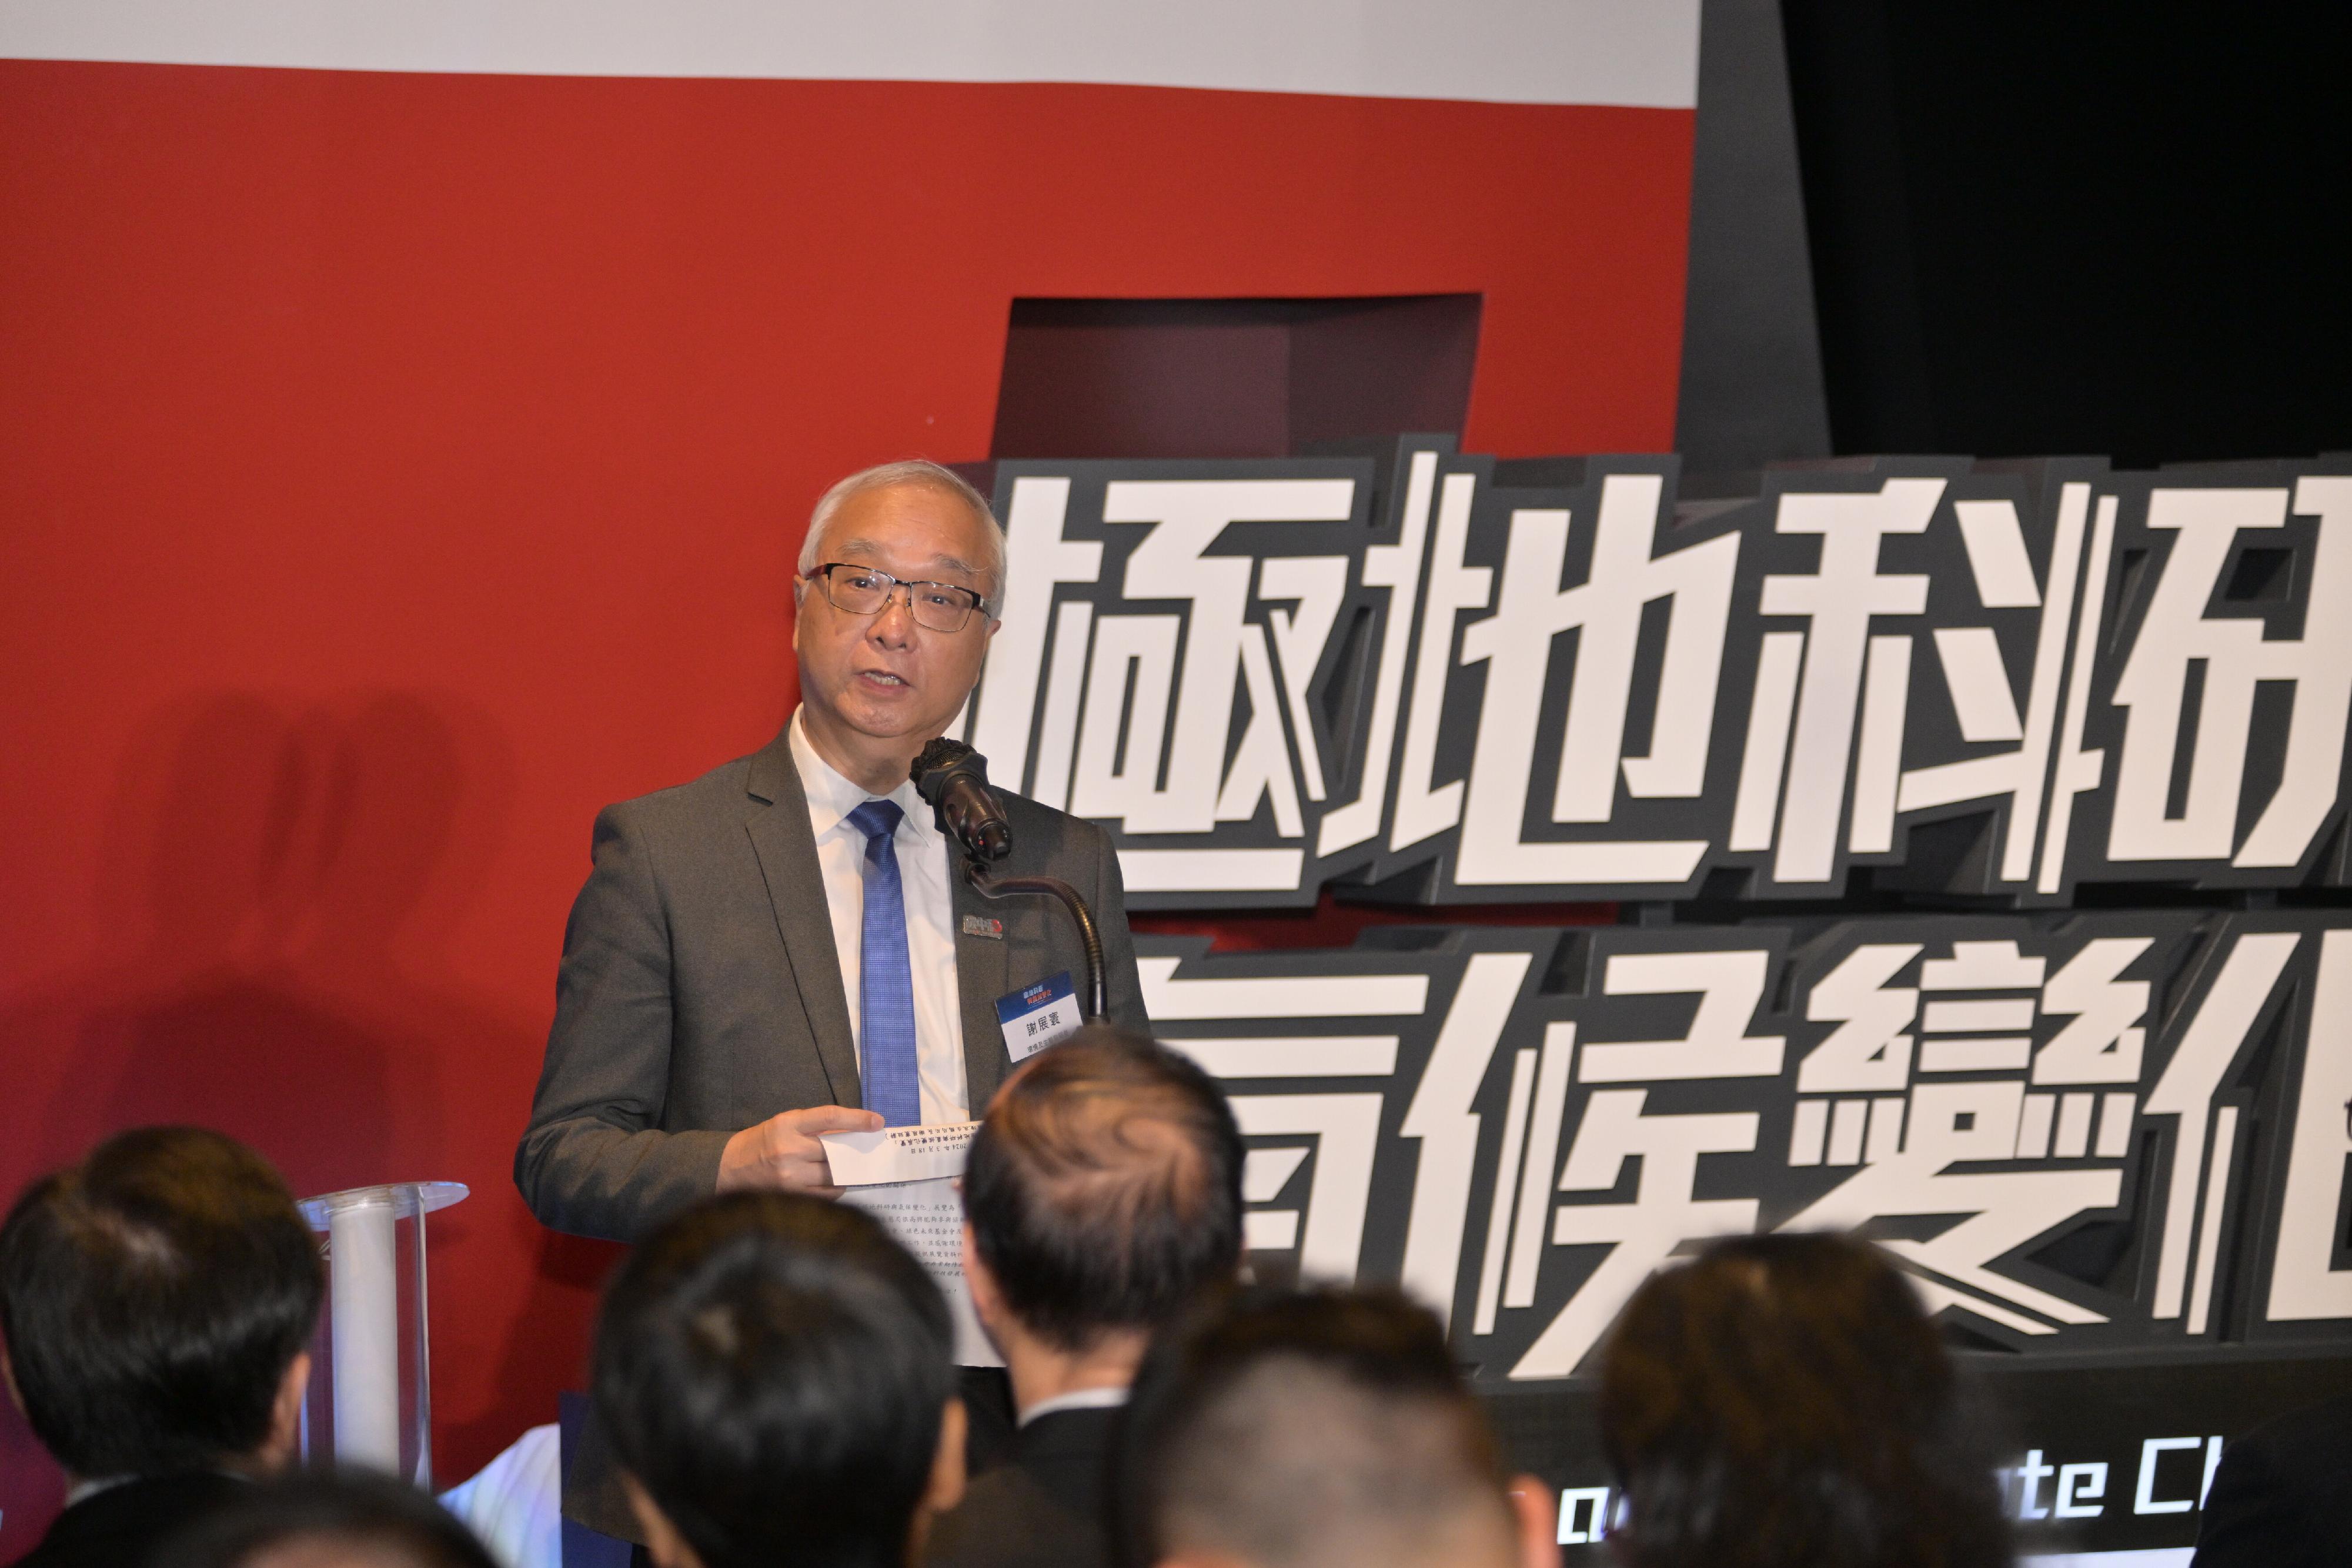 The "Polar Research and Climate Change" exhibition opened at the Hong Kong Science Museum today (March 18). Photo shows the Secretary for Environment and Ecology, Mr Tse Chin-wan, delivering a speech at the opening ceremony.